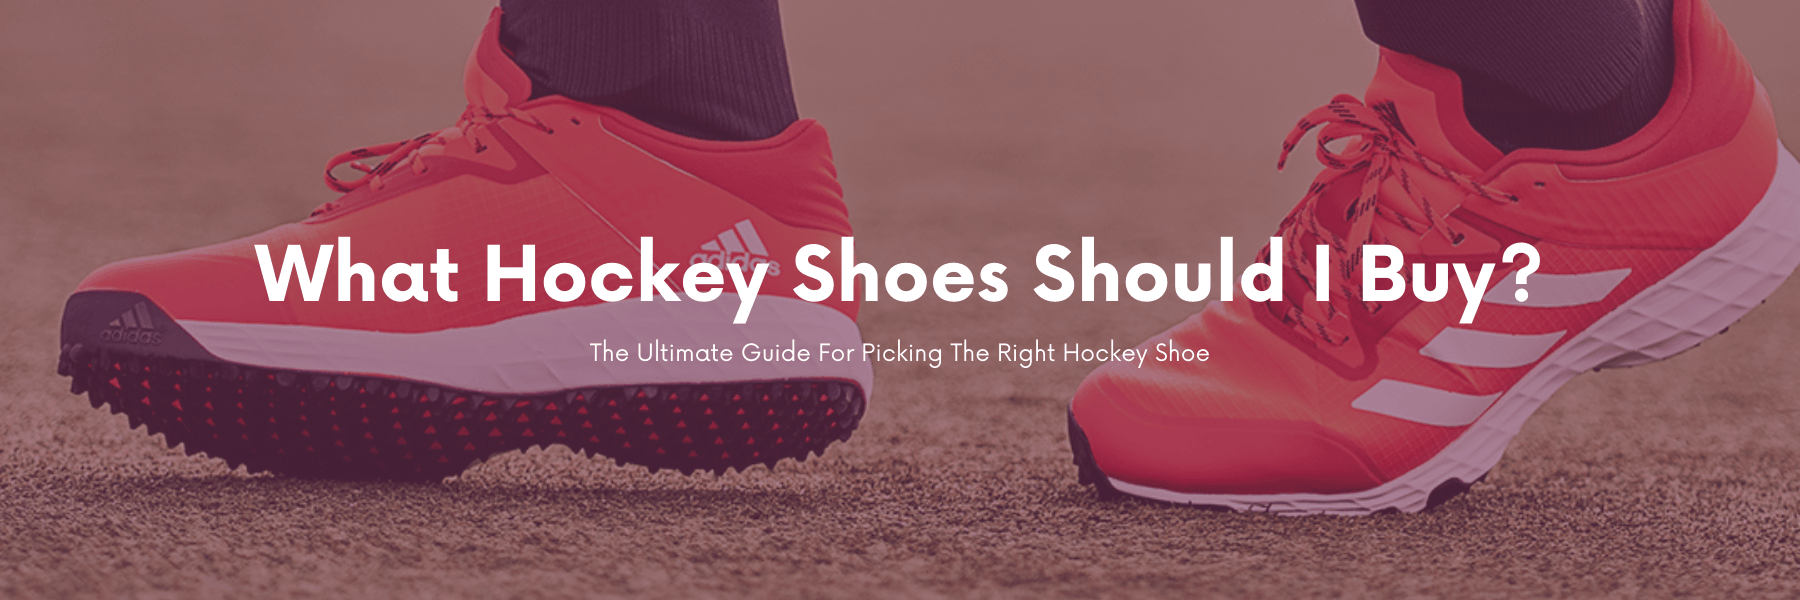 lade hebzuchtig aansporing What Hockey Shoes Should I Buy? | Adult Hockey Shoes | Hockey Shoes